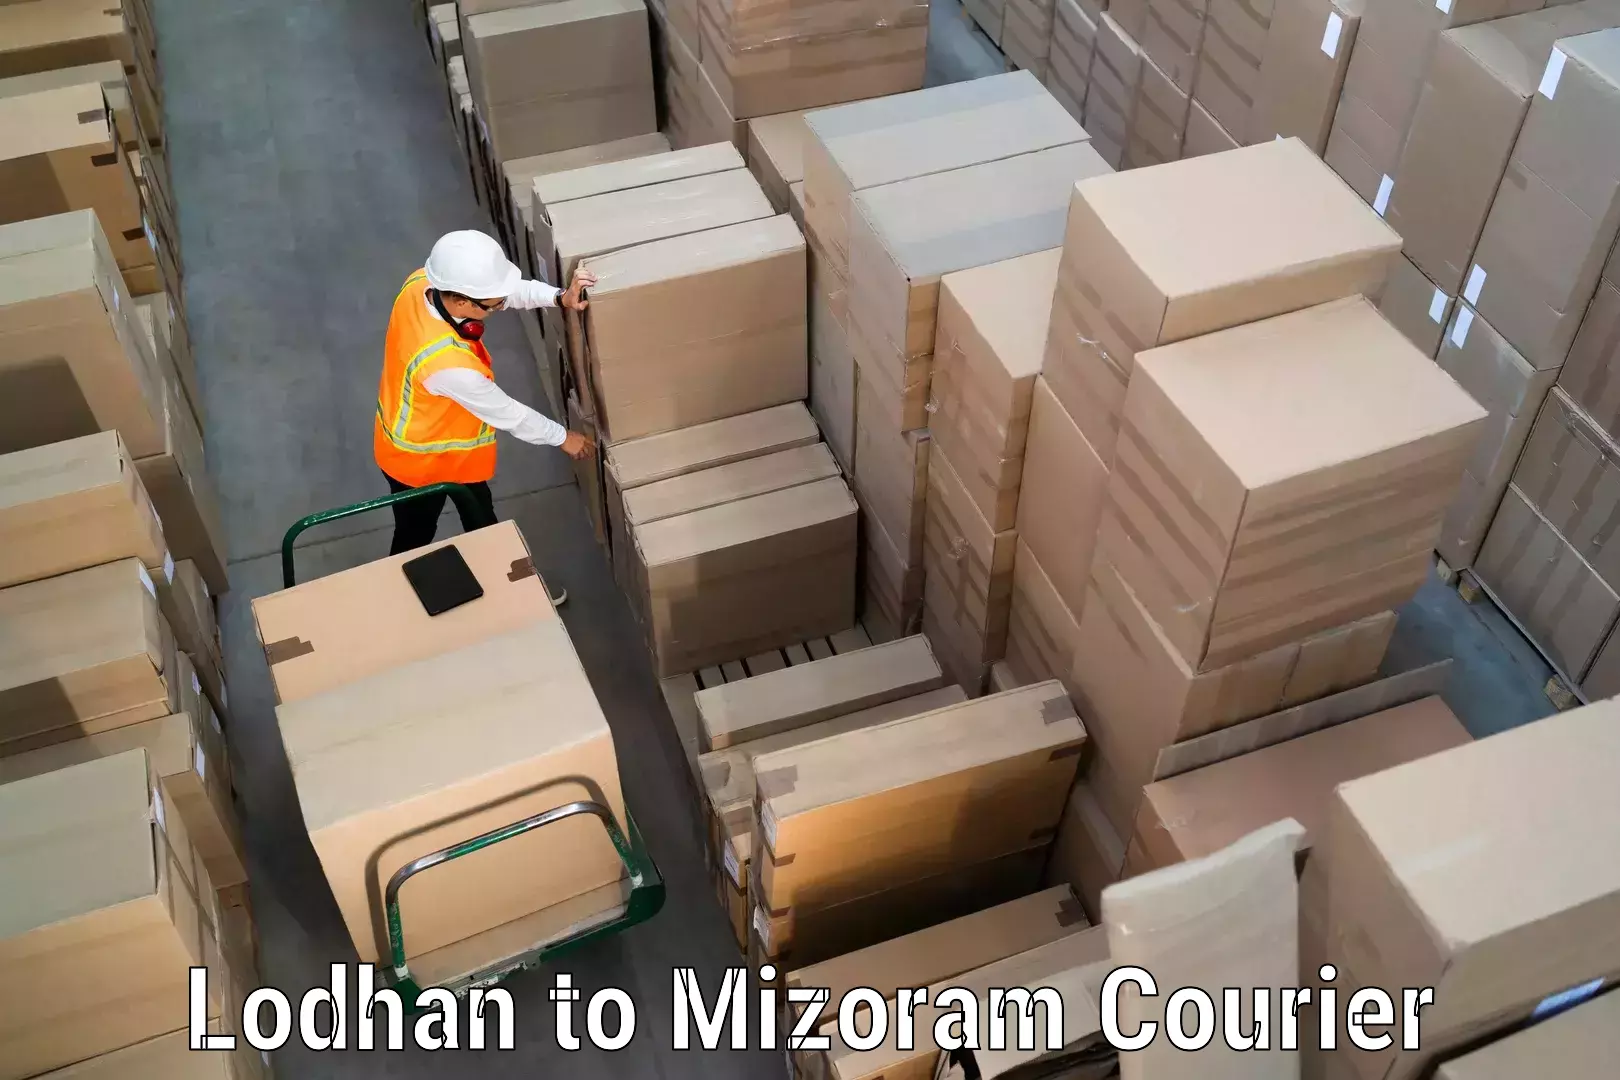 Express package services Lodhan to Mizoram